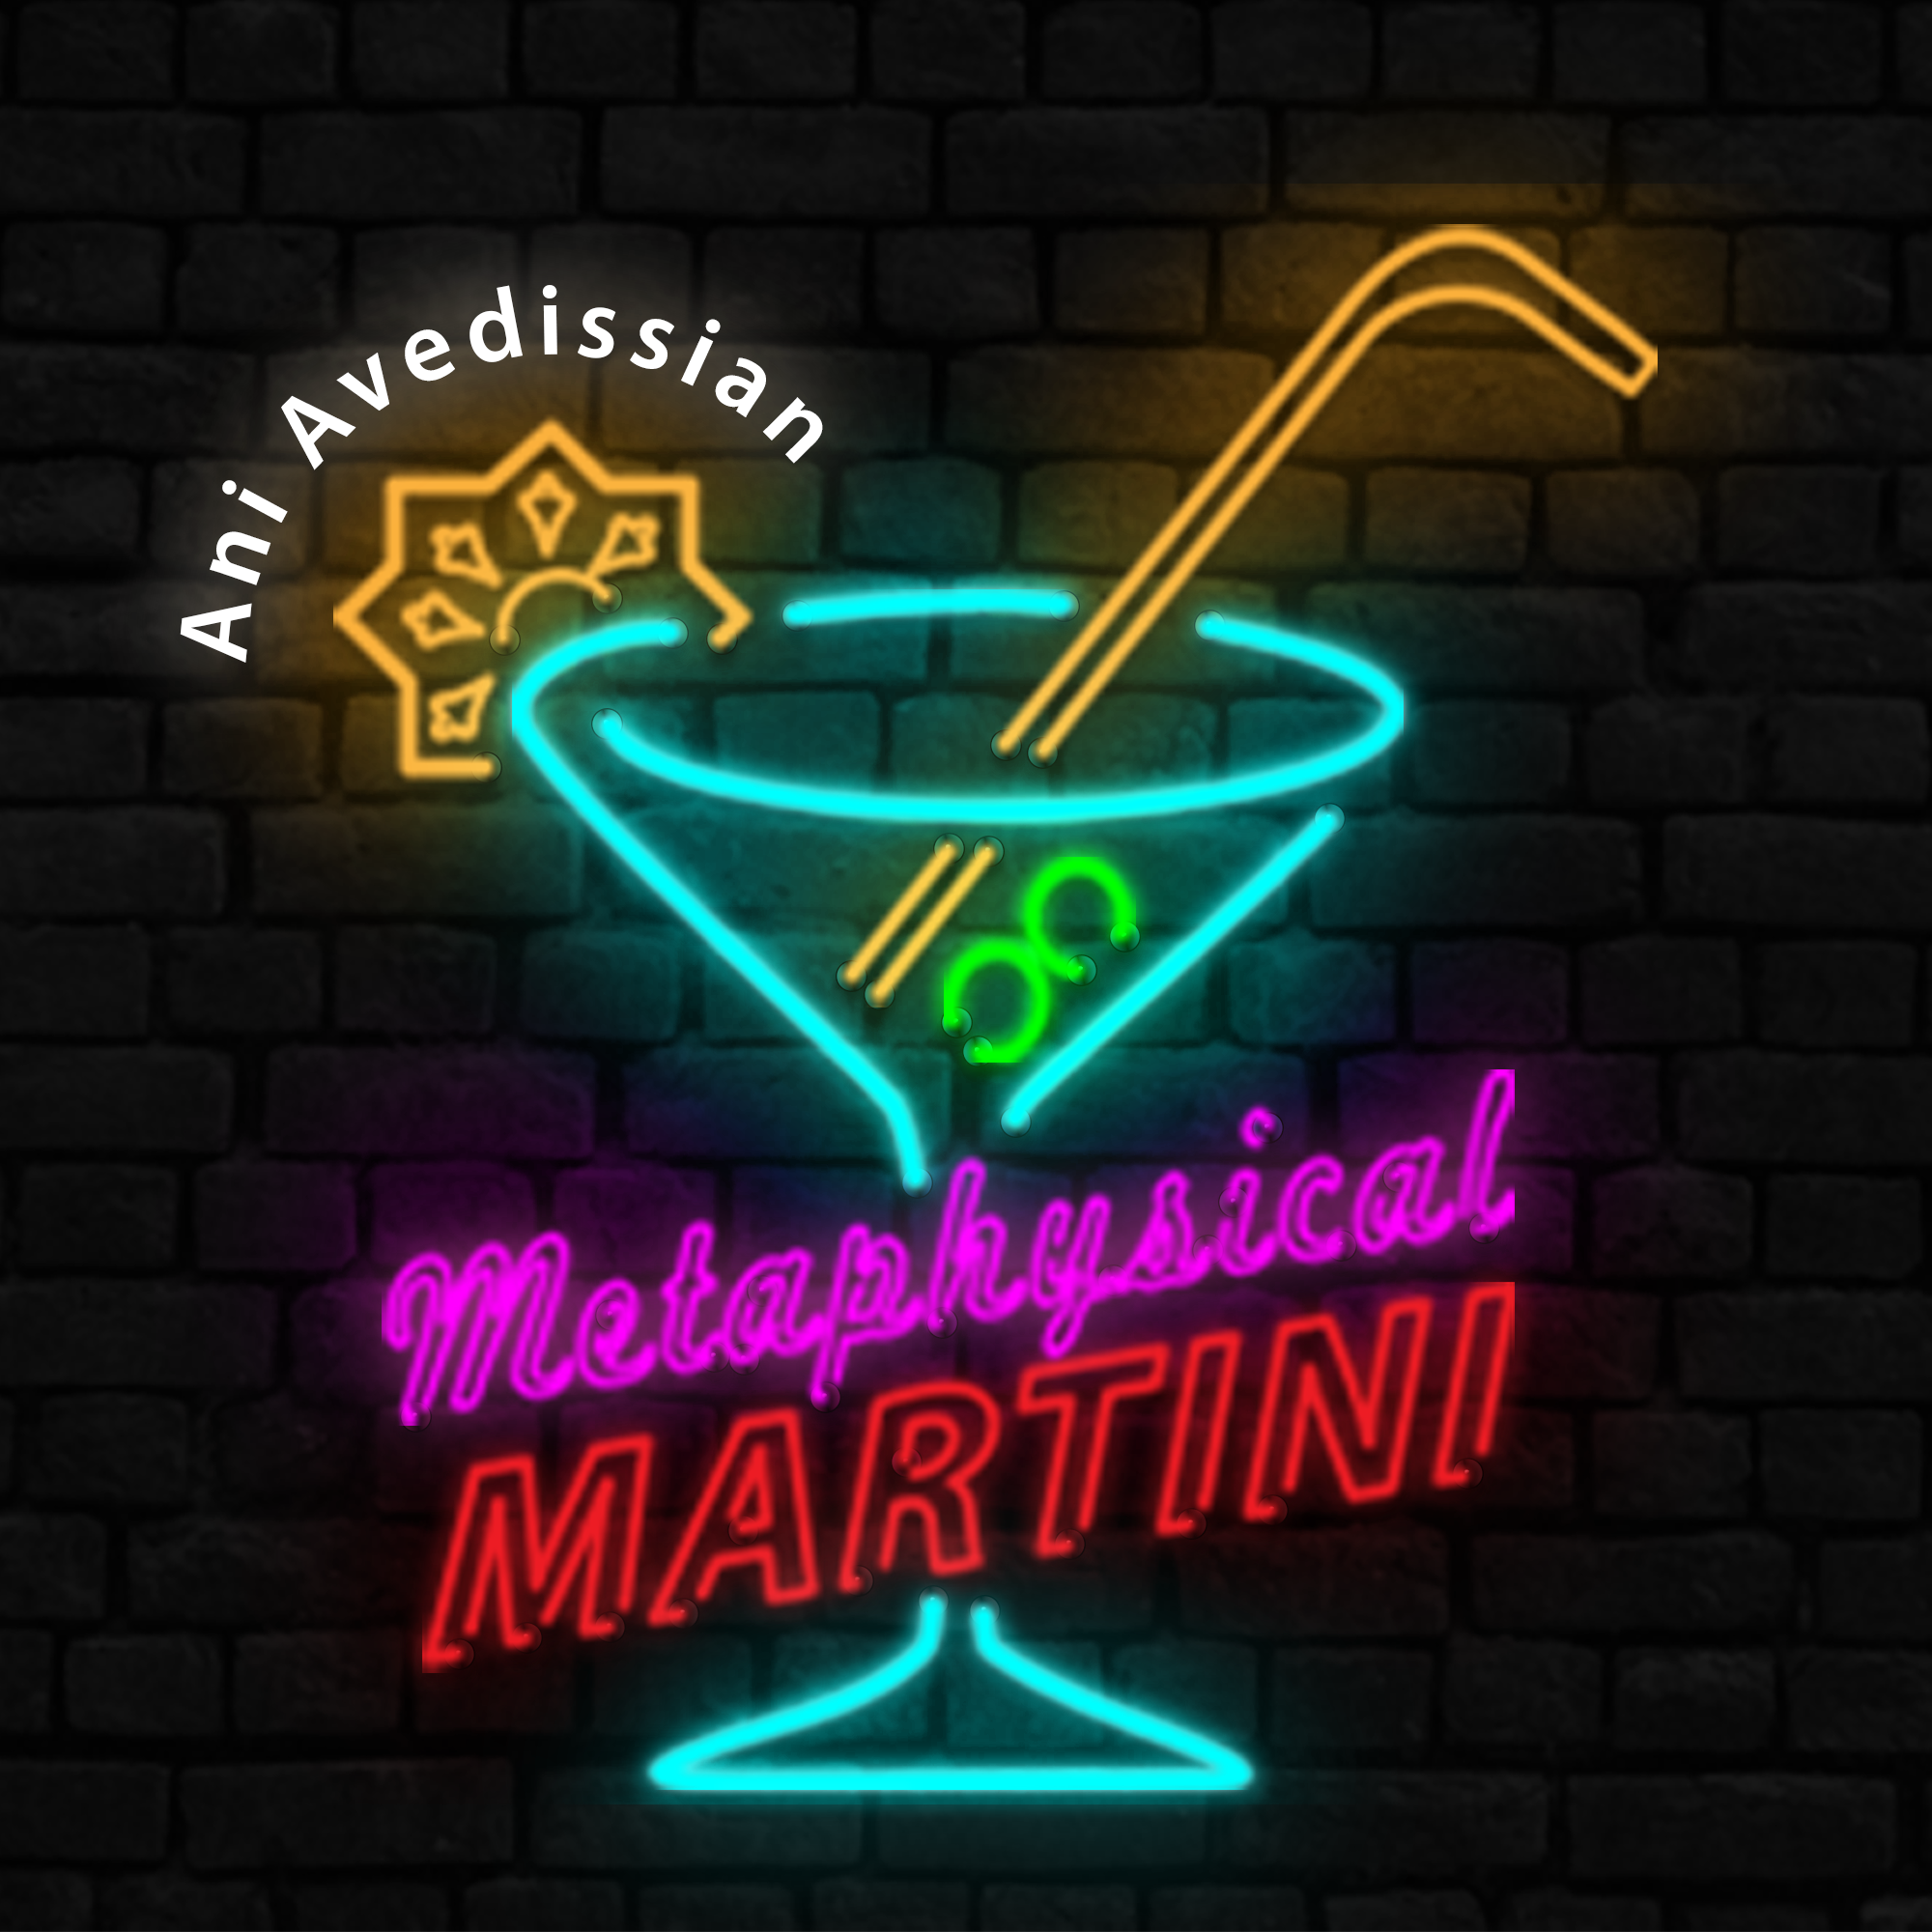 "Metaphysical Martini" 08/04/2021 Can land be stolen?  Let's talk